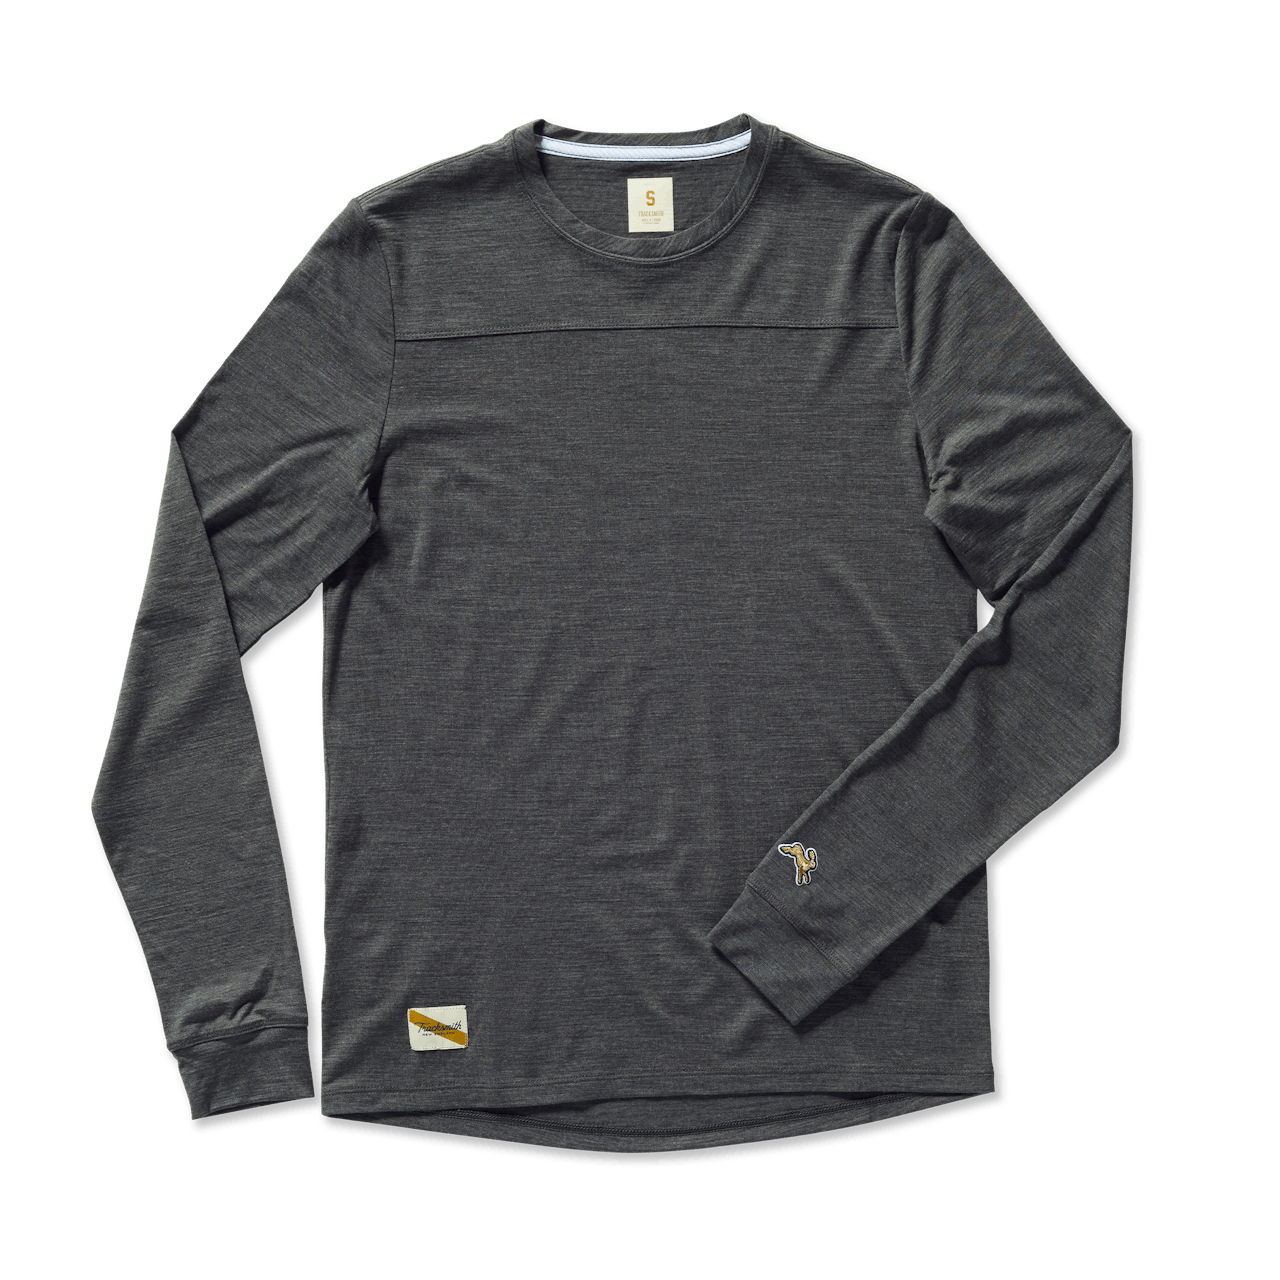  Pursue Fitness Long Sleeve T-Shirt : Clothing, Shoes & Jewelry